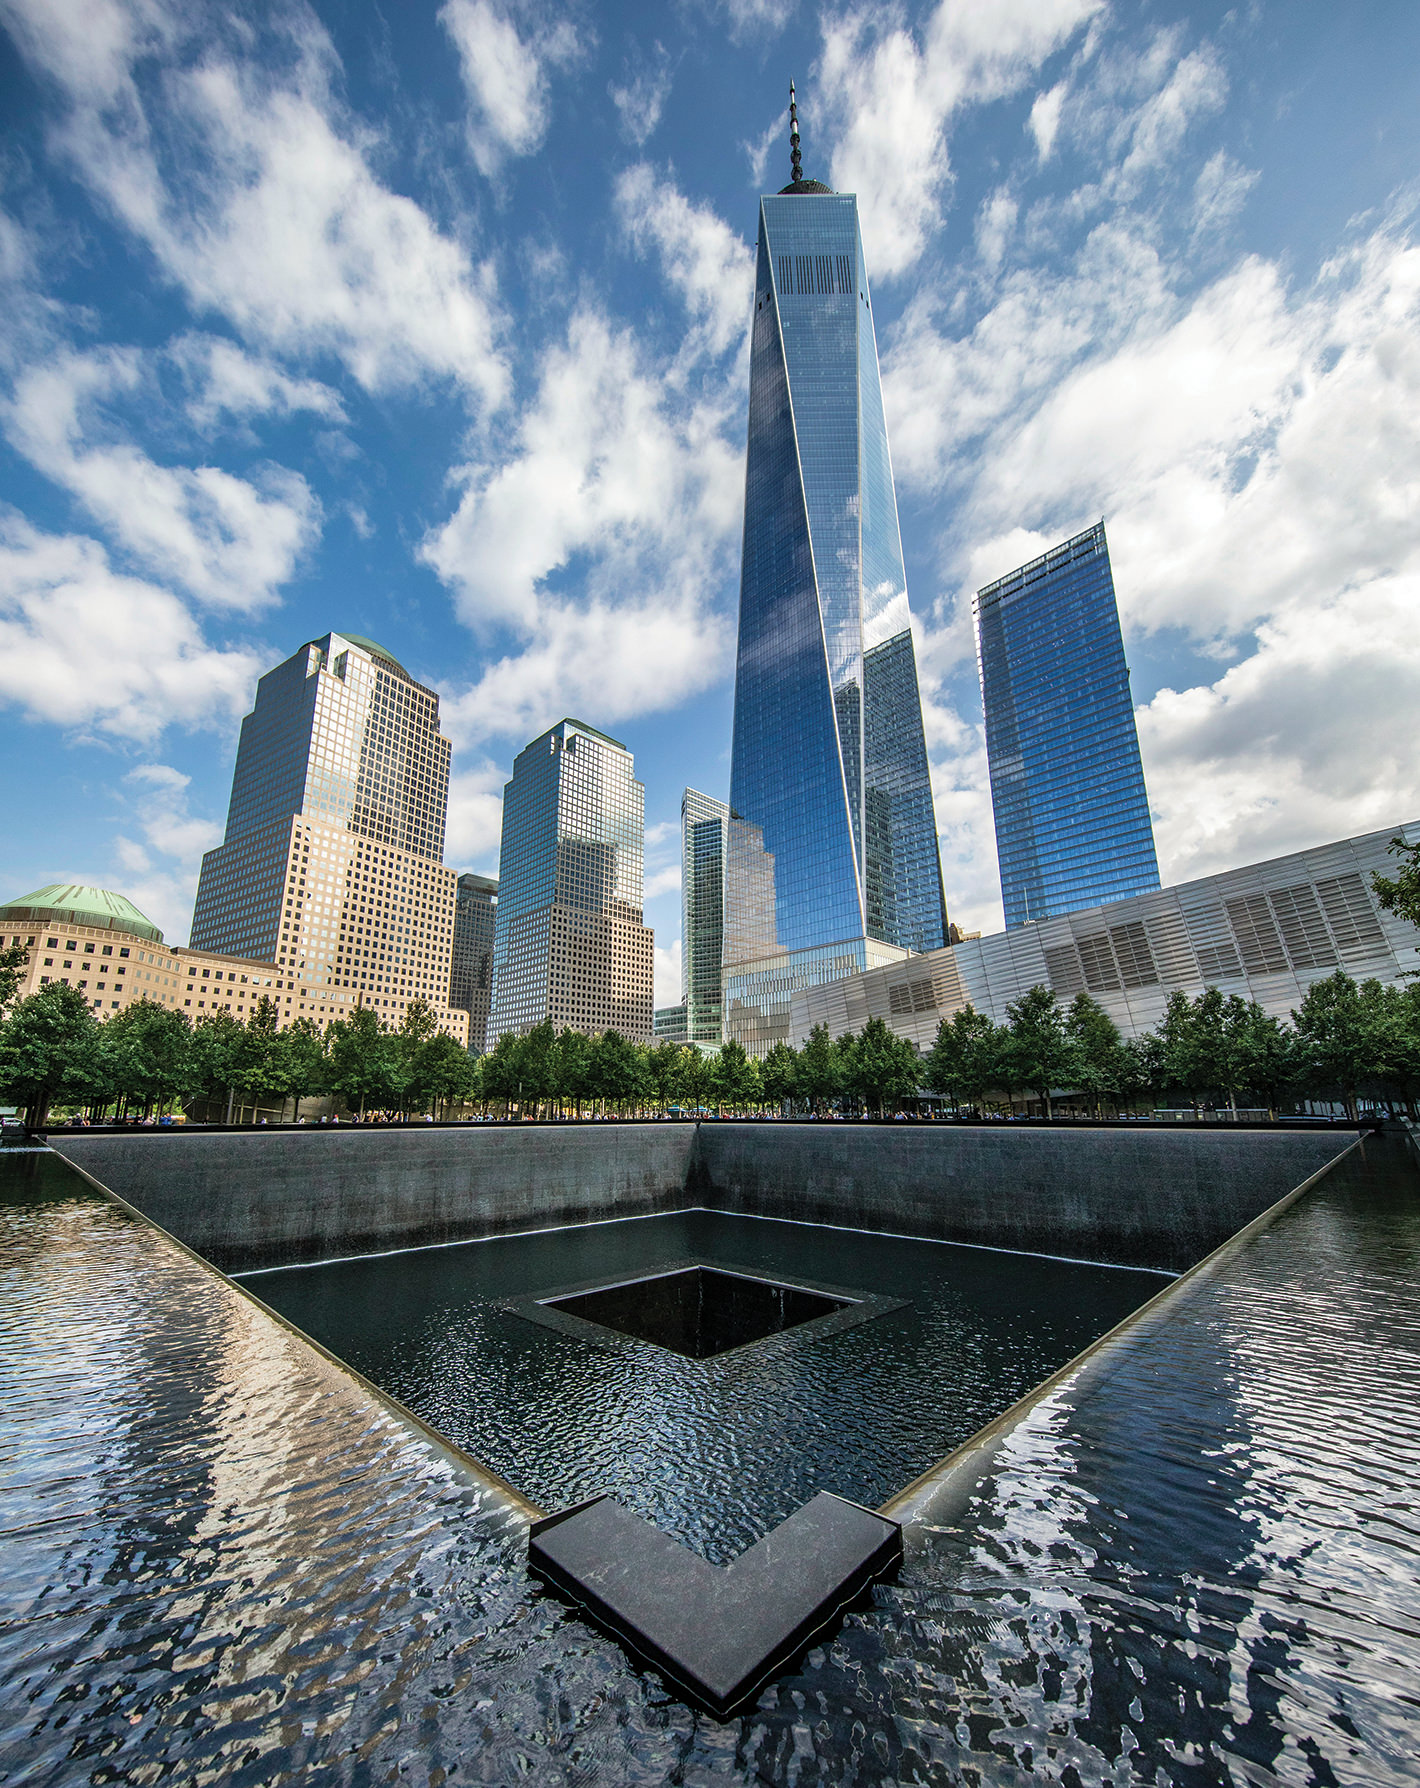 The One World Trade Center building rises above the reflecting pools at the 9/11 Memorial in Lower Manhattan.